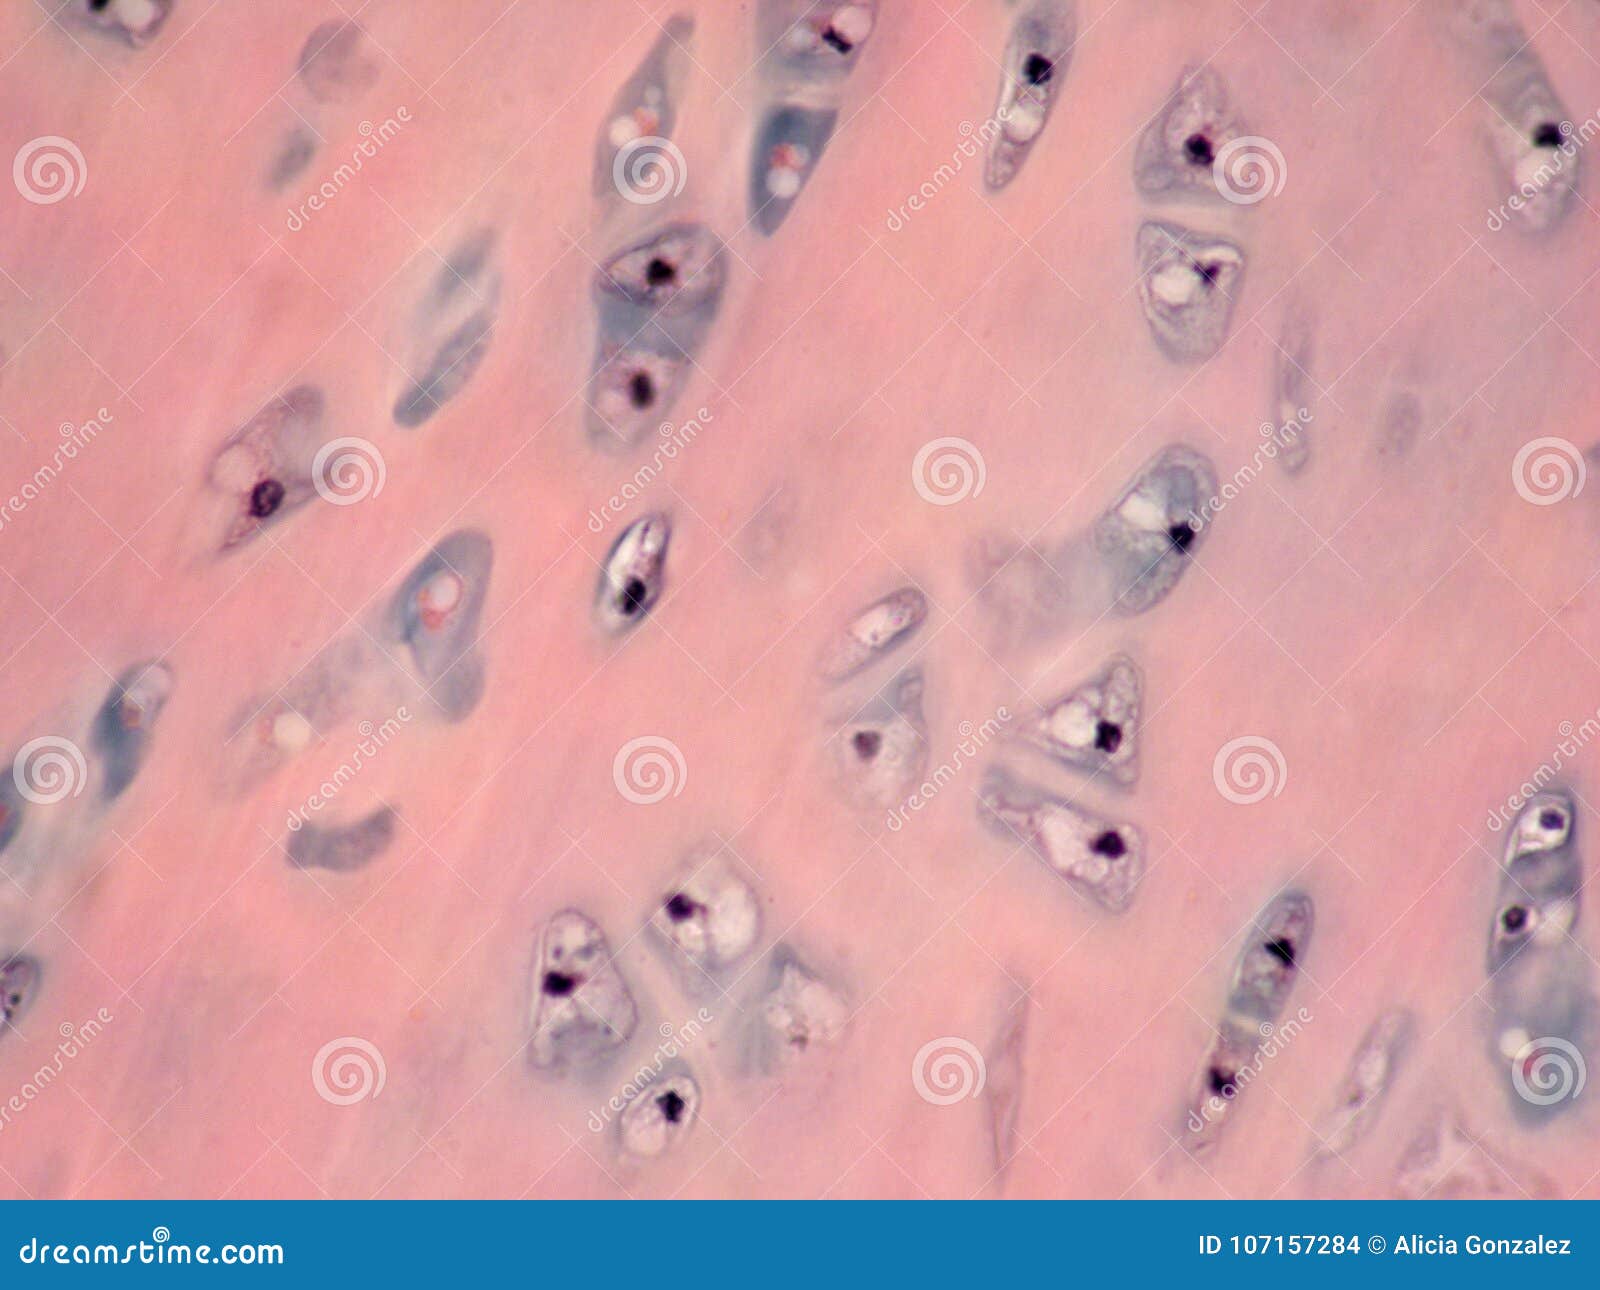 cartilaginous chondriom tissue microphotography under optic microscope 200x